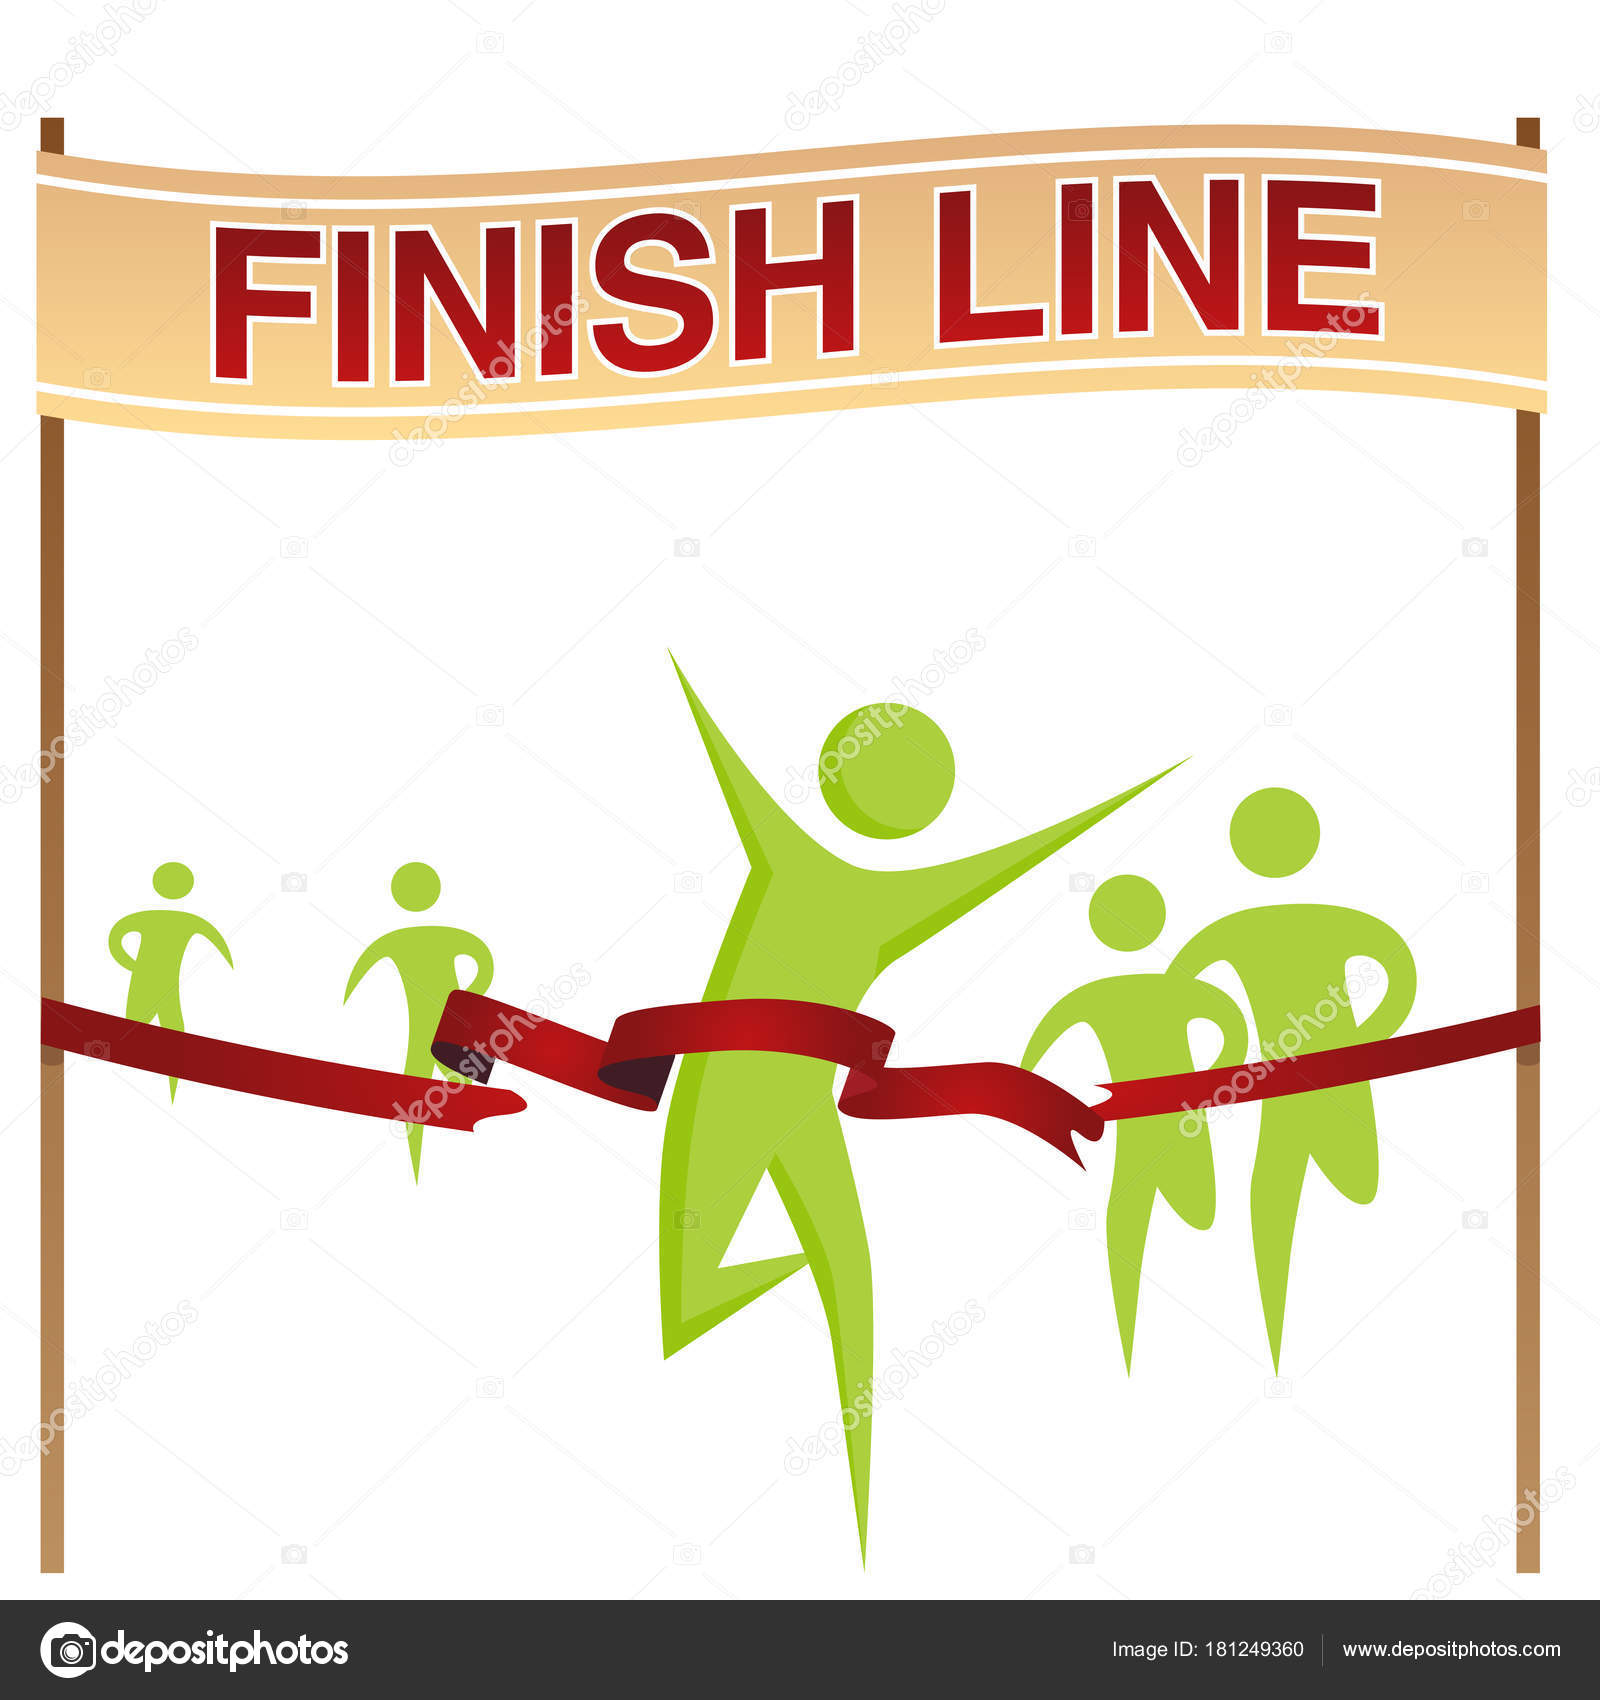 Finish line Vectors & Illustrations for Free Download